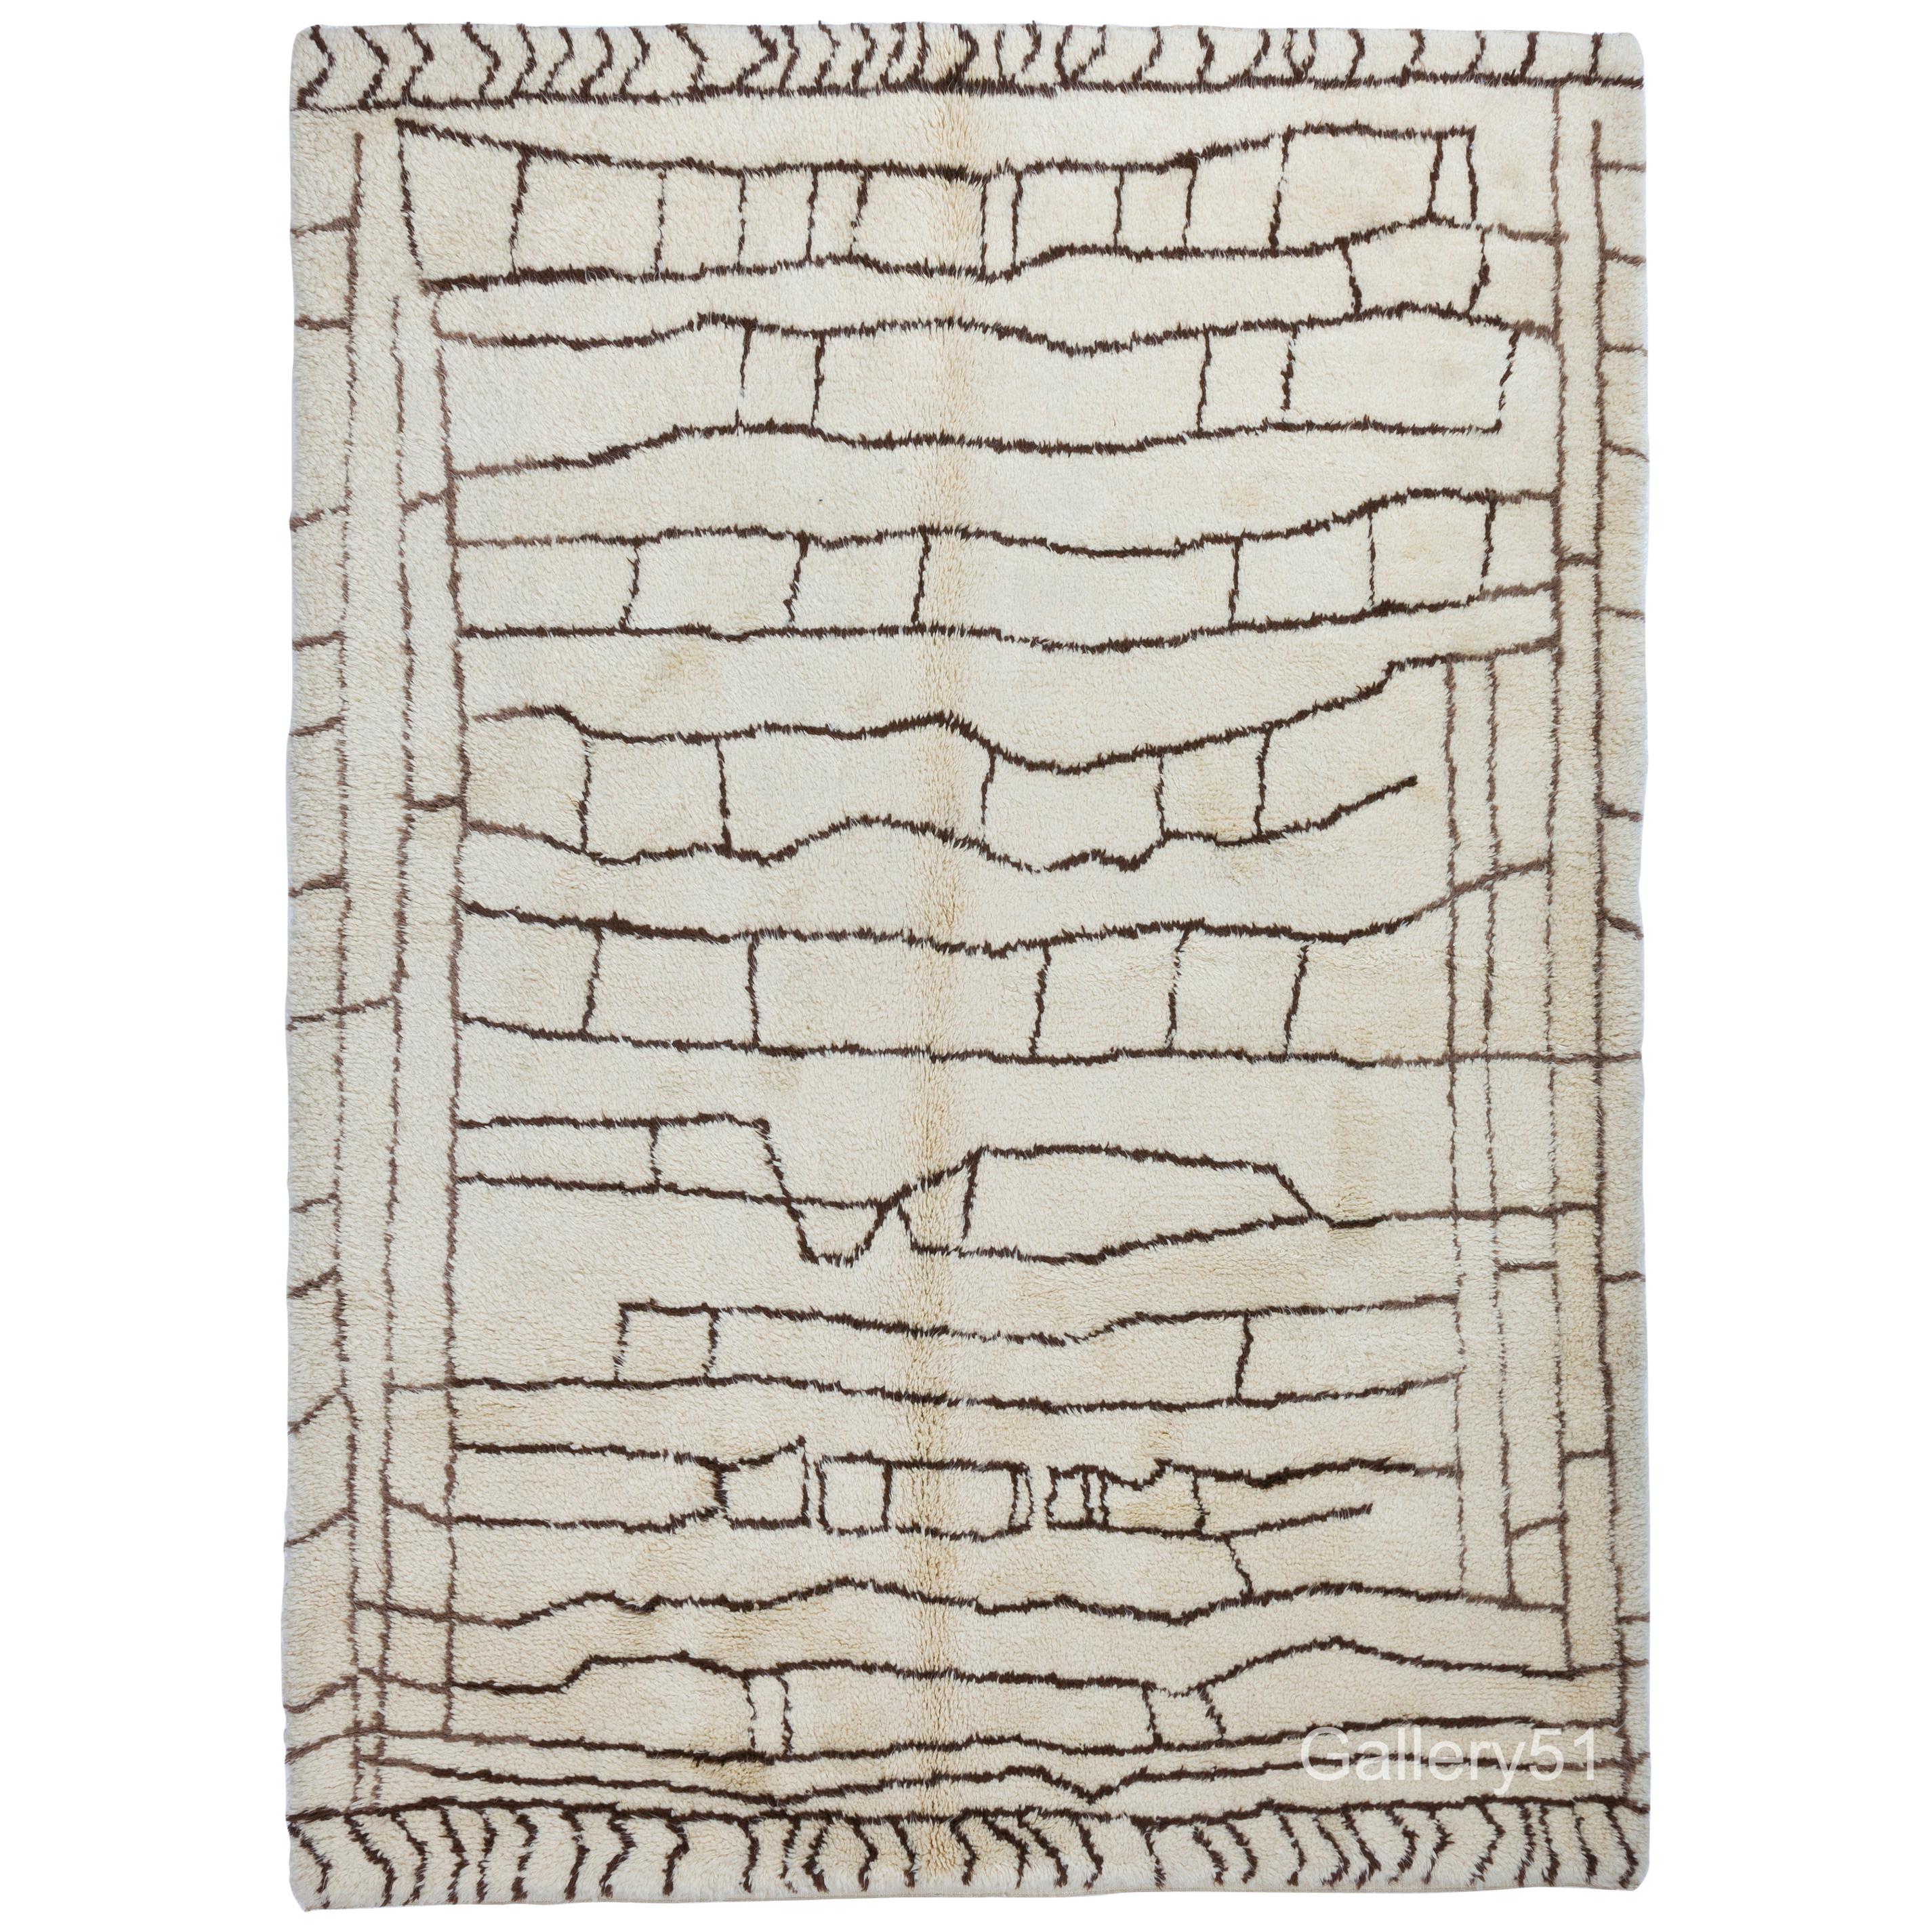 7.5x10 Ft Contemporary Moroccan Beni Ourain Rug Made Of Un-dyed Natural Wool